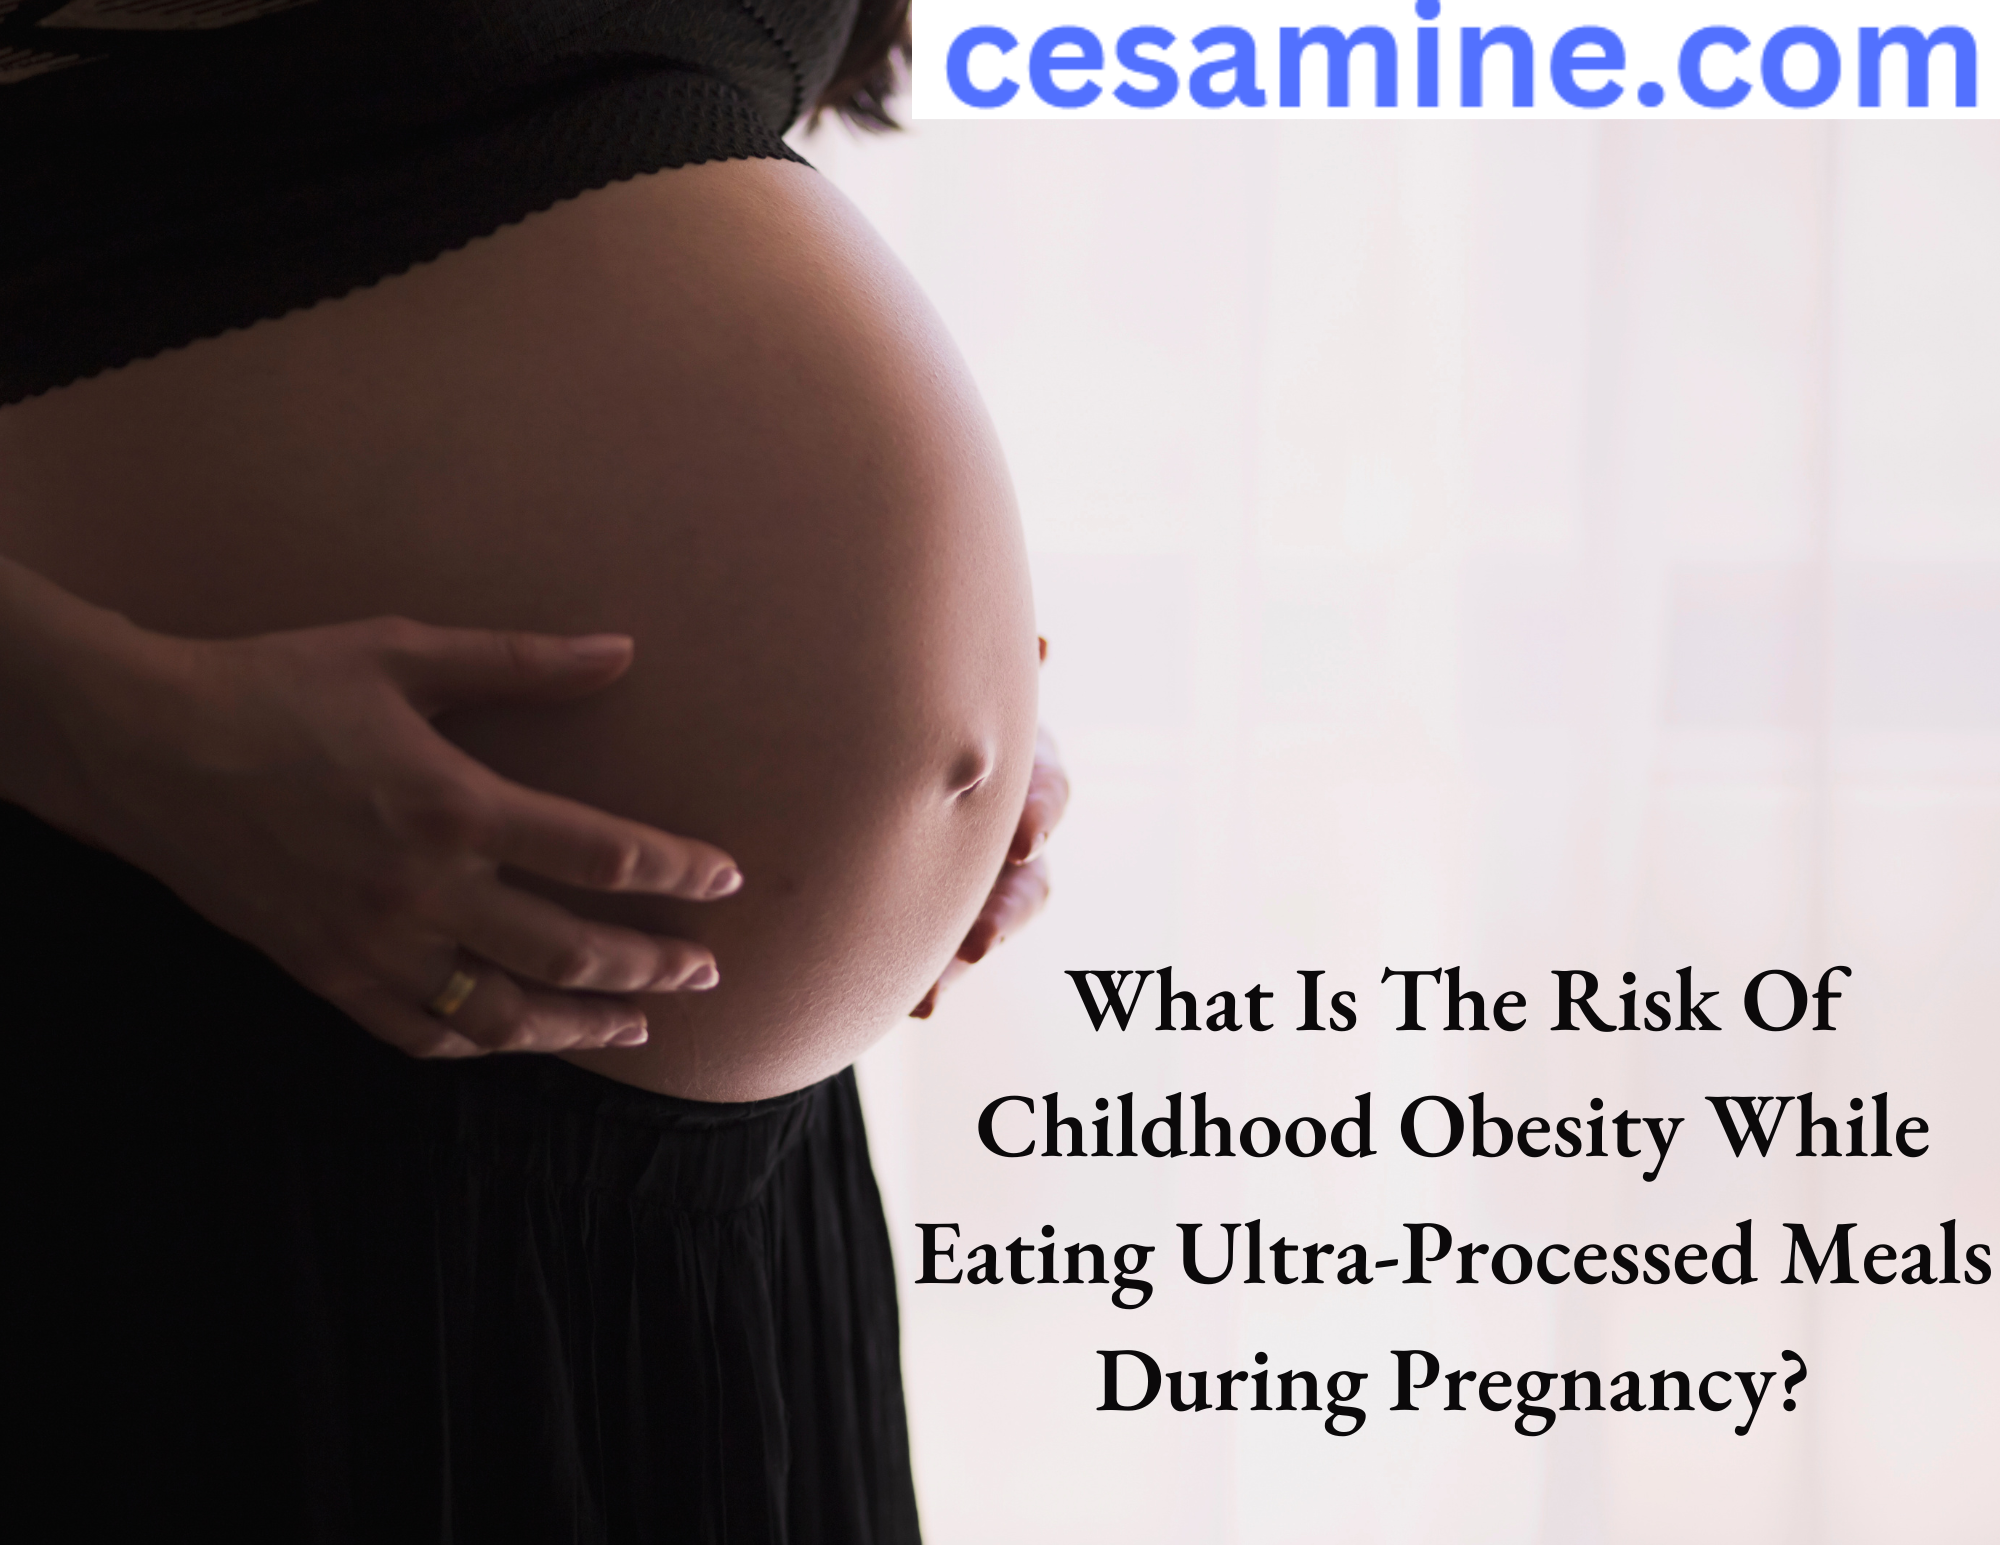 What Is The Risk Of Childhood Obesity While Eating Ultra-Processed Meals During Pregnancy